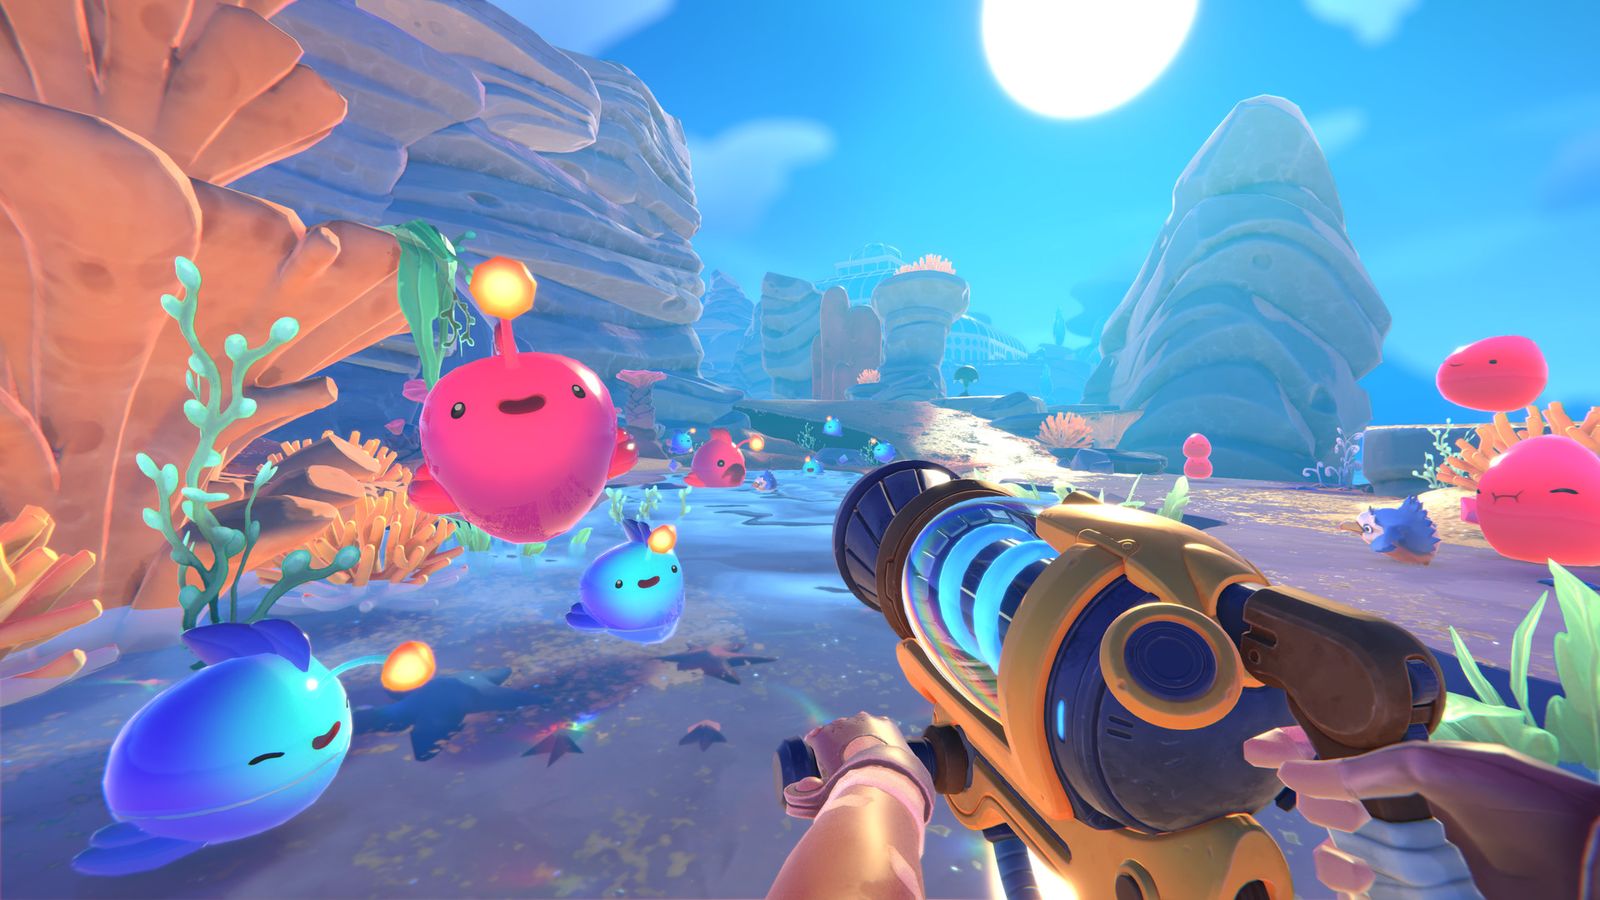 Suck up some creatures in Slime Rancher 2 via Xbox Game Pass